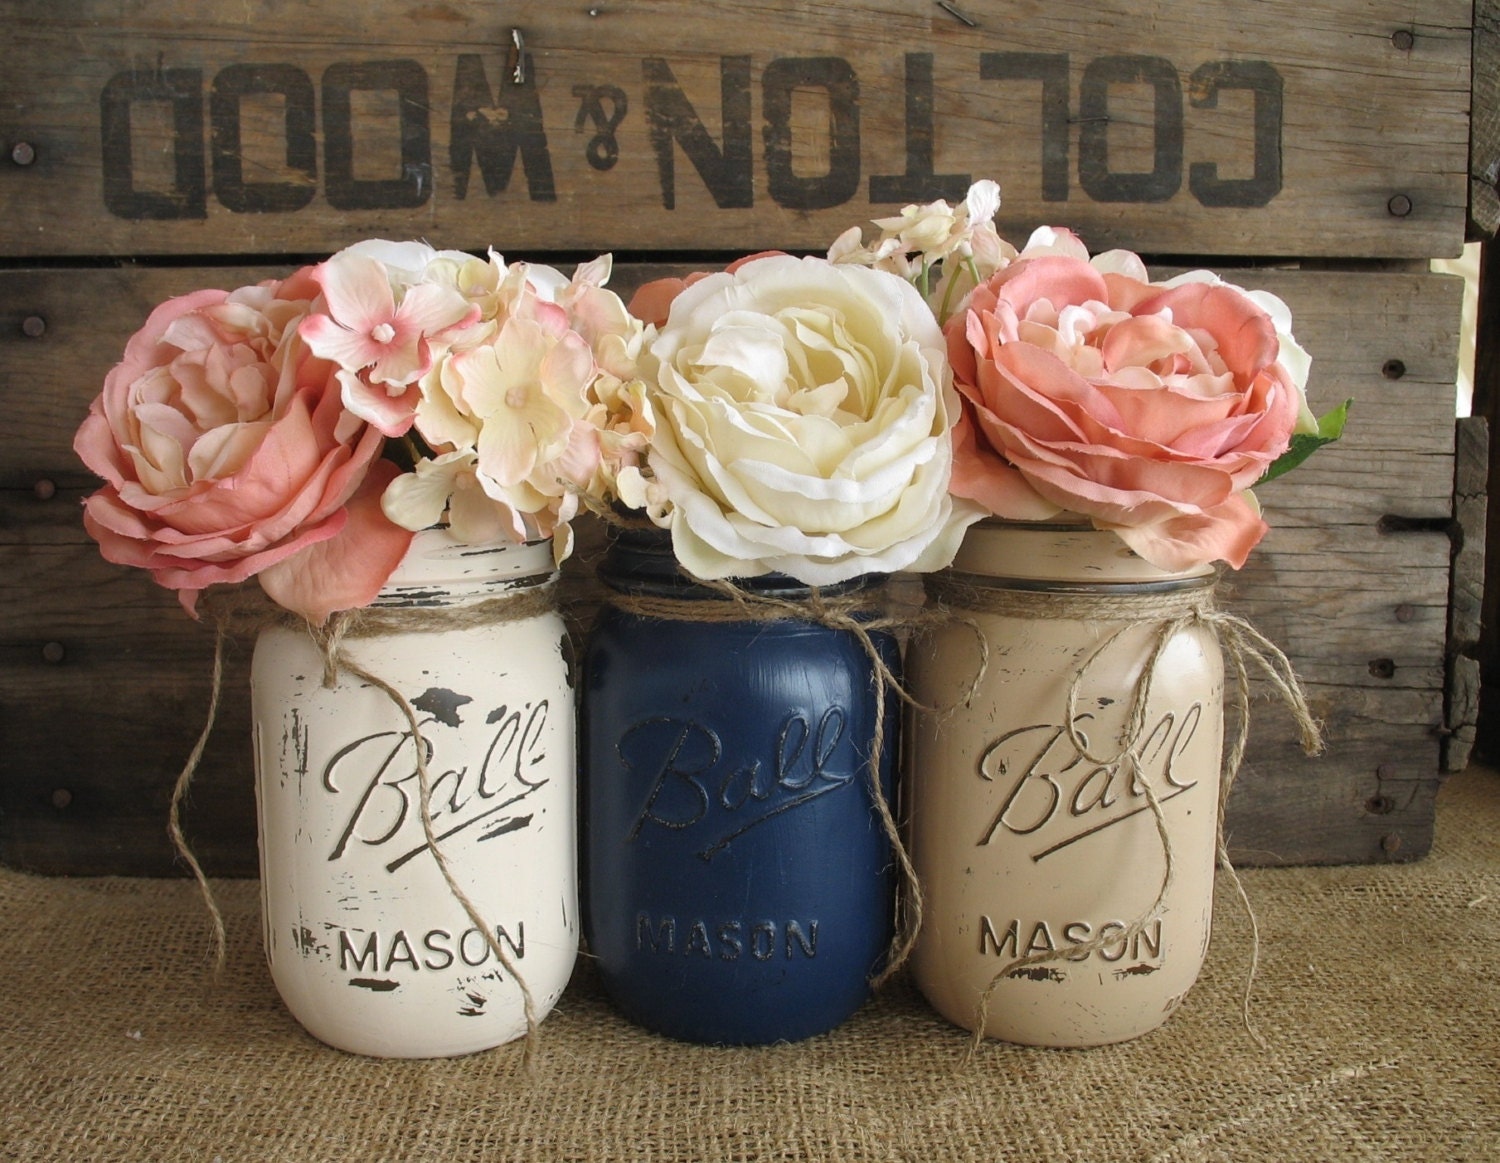 Country home wedding ideas.